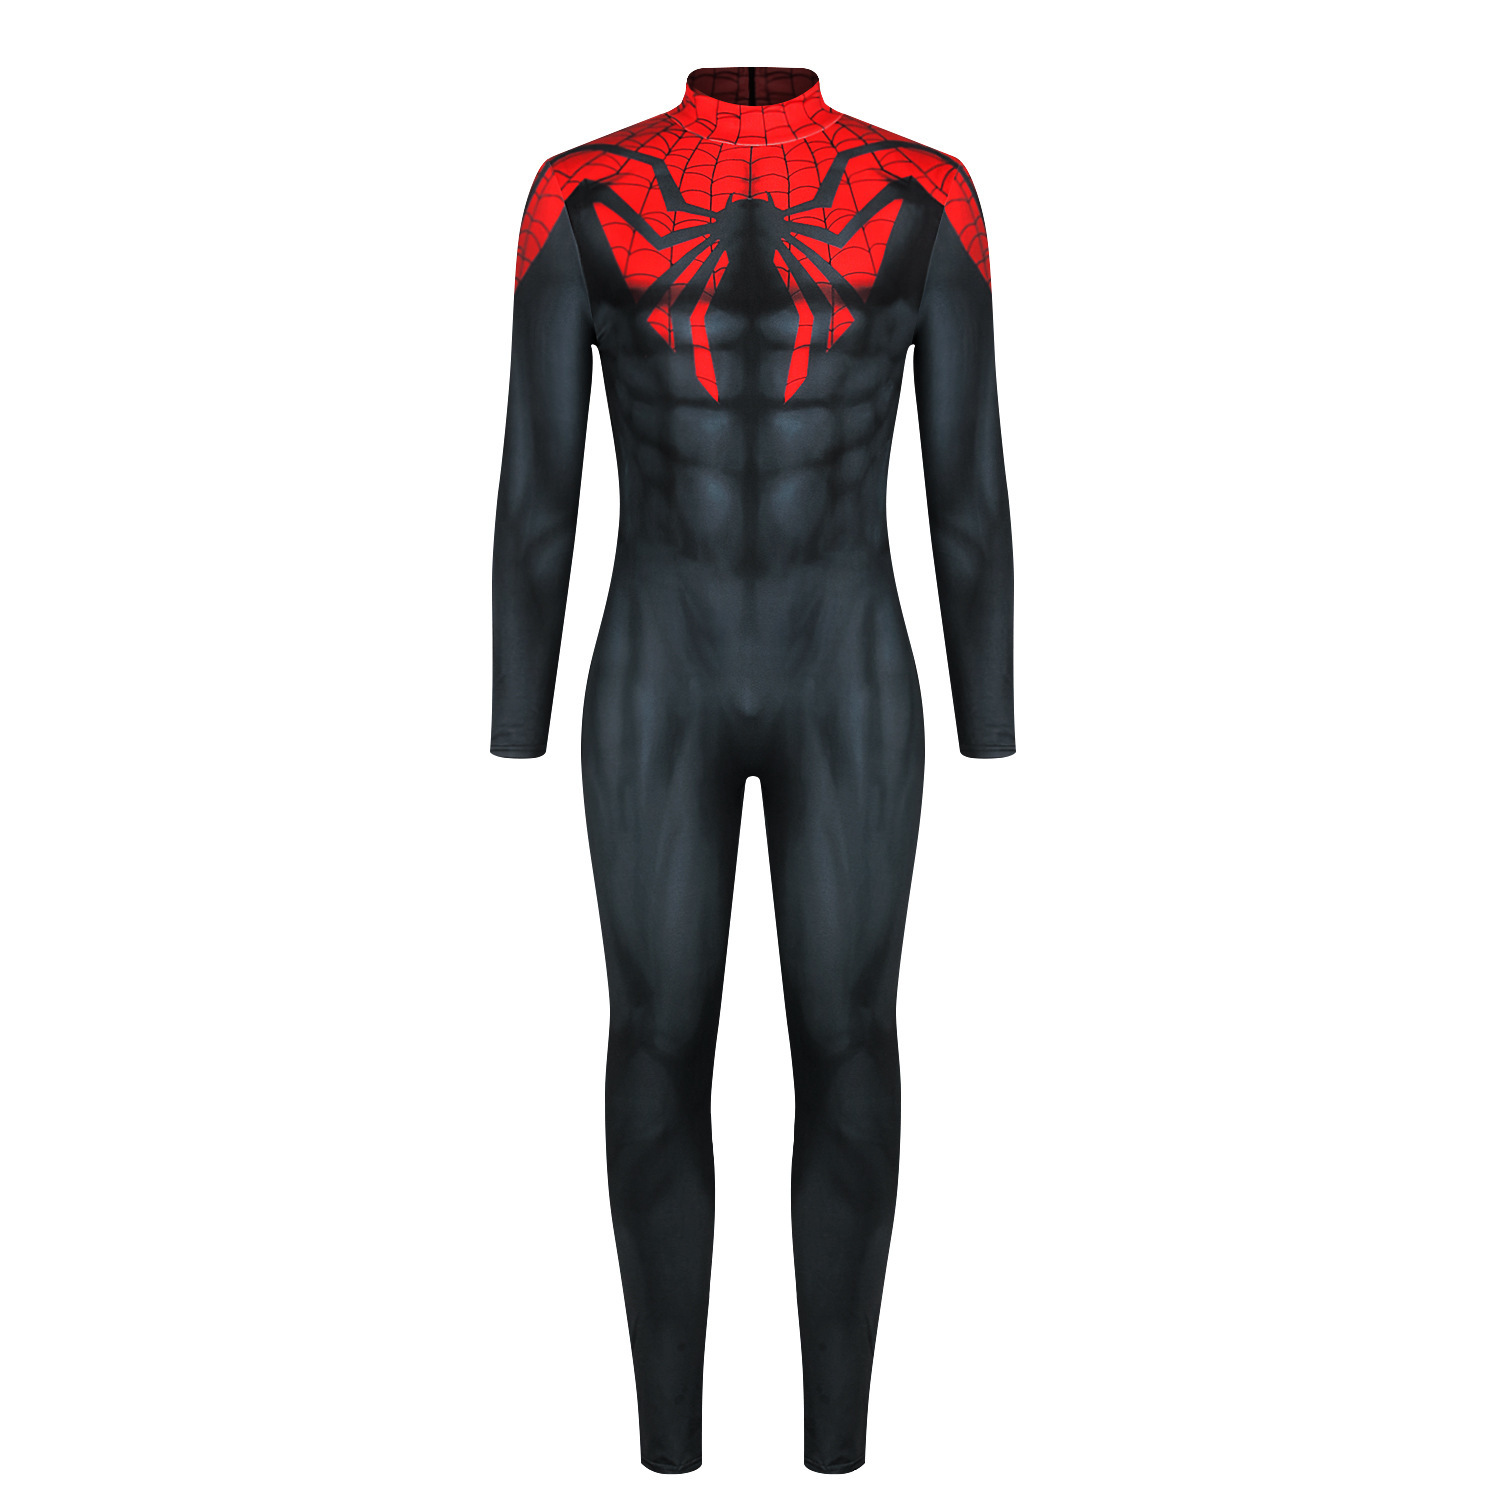 Mens Cosplays Spider Jumpsuit Tight Siamese Adjust Cosplay Costume Size XXL